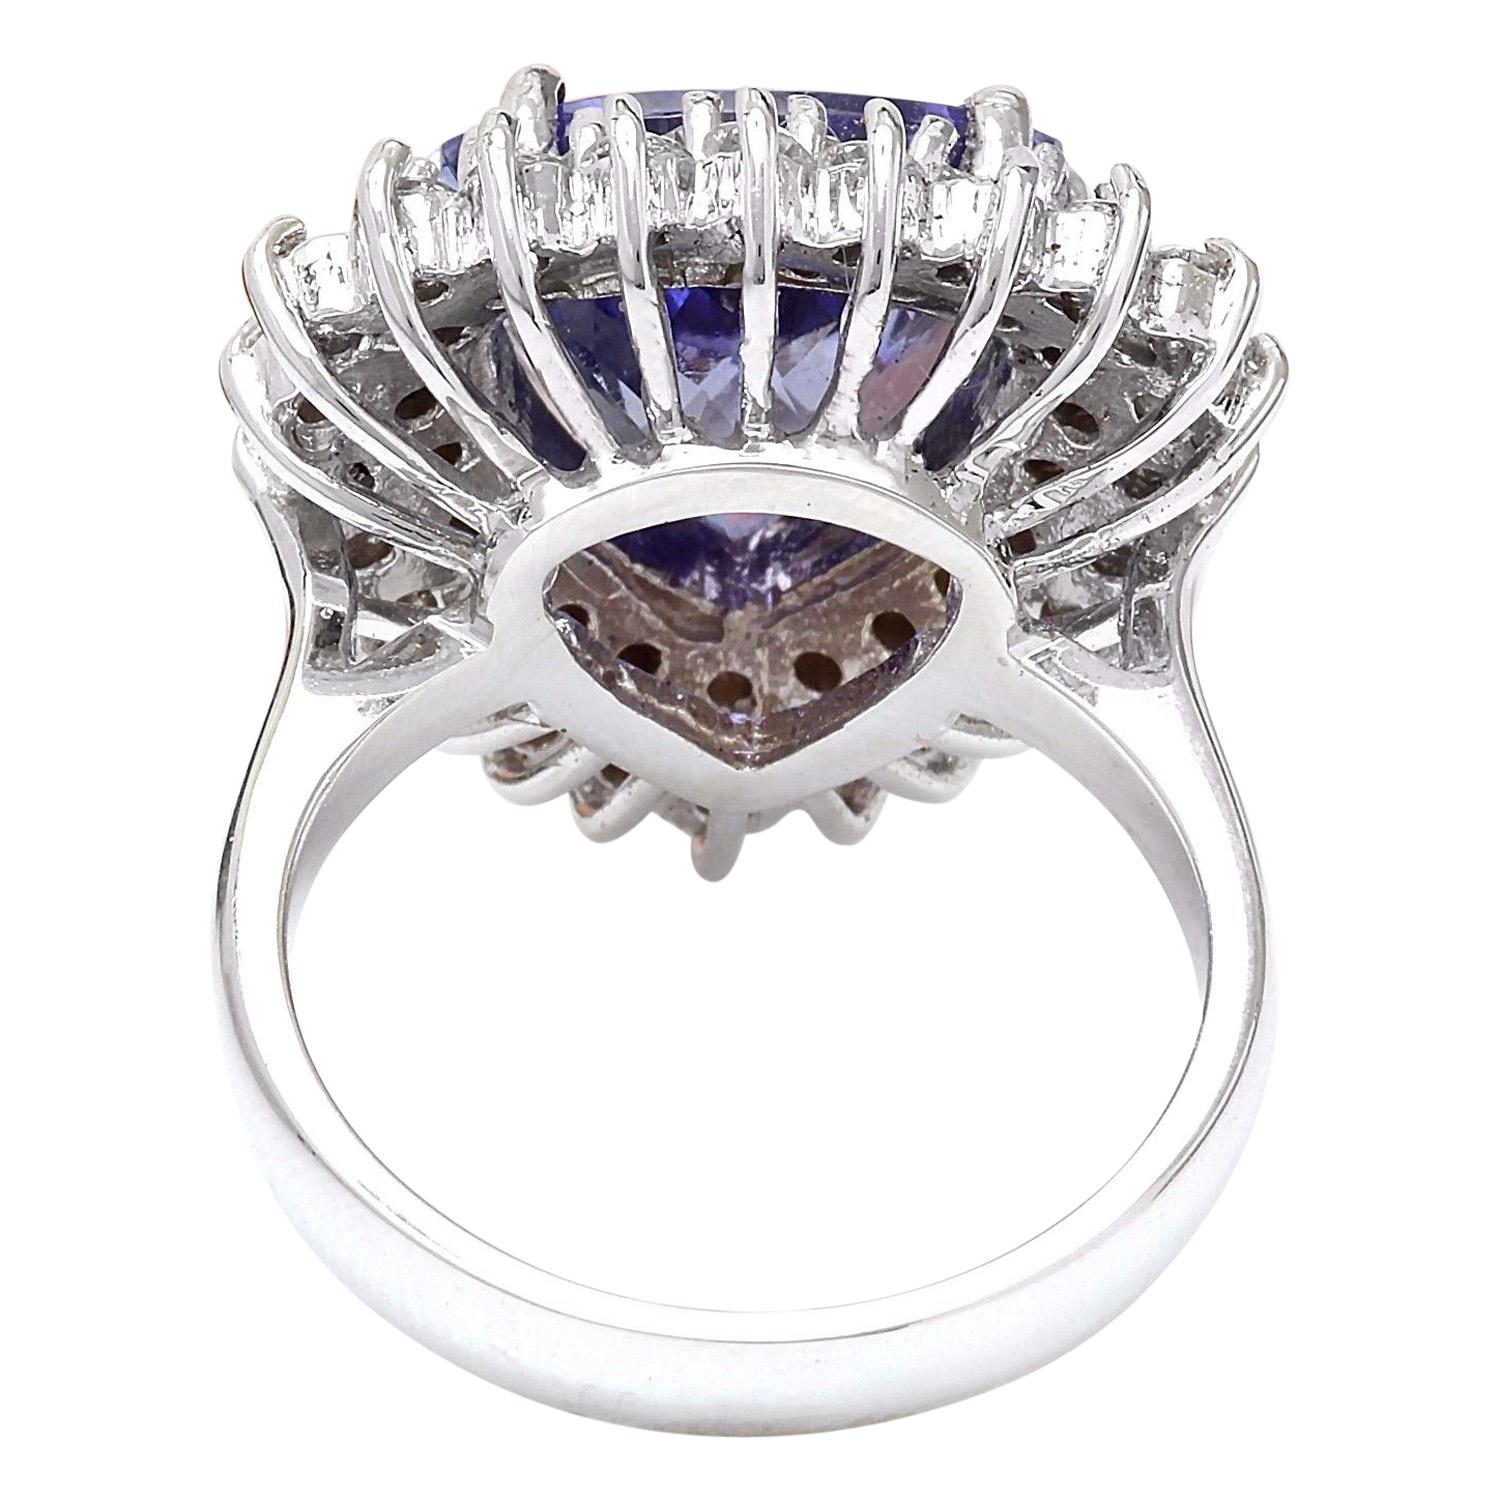 8.23 Carat Tanzanite 18 Karat Solid White Gold Diamond Ring In New Condition For Sale In Los Angeles, CA